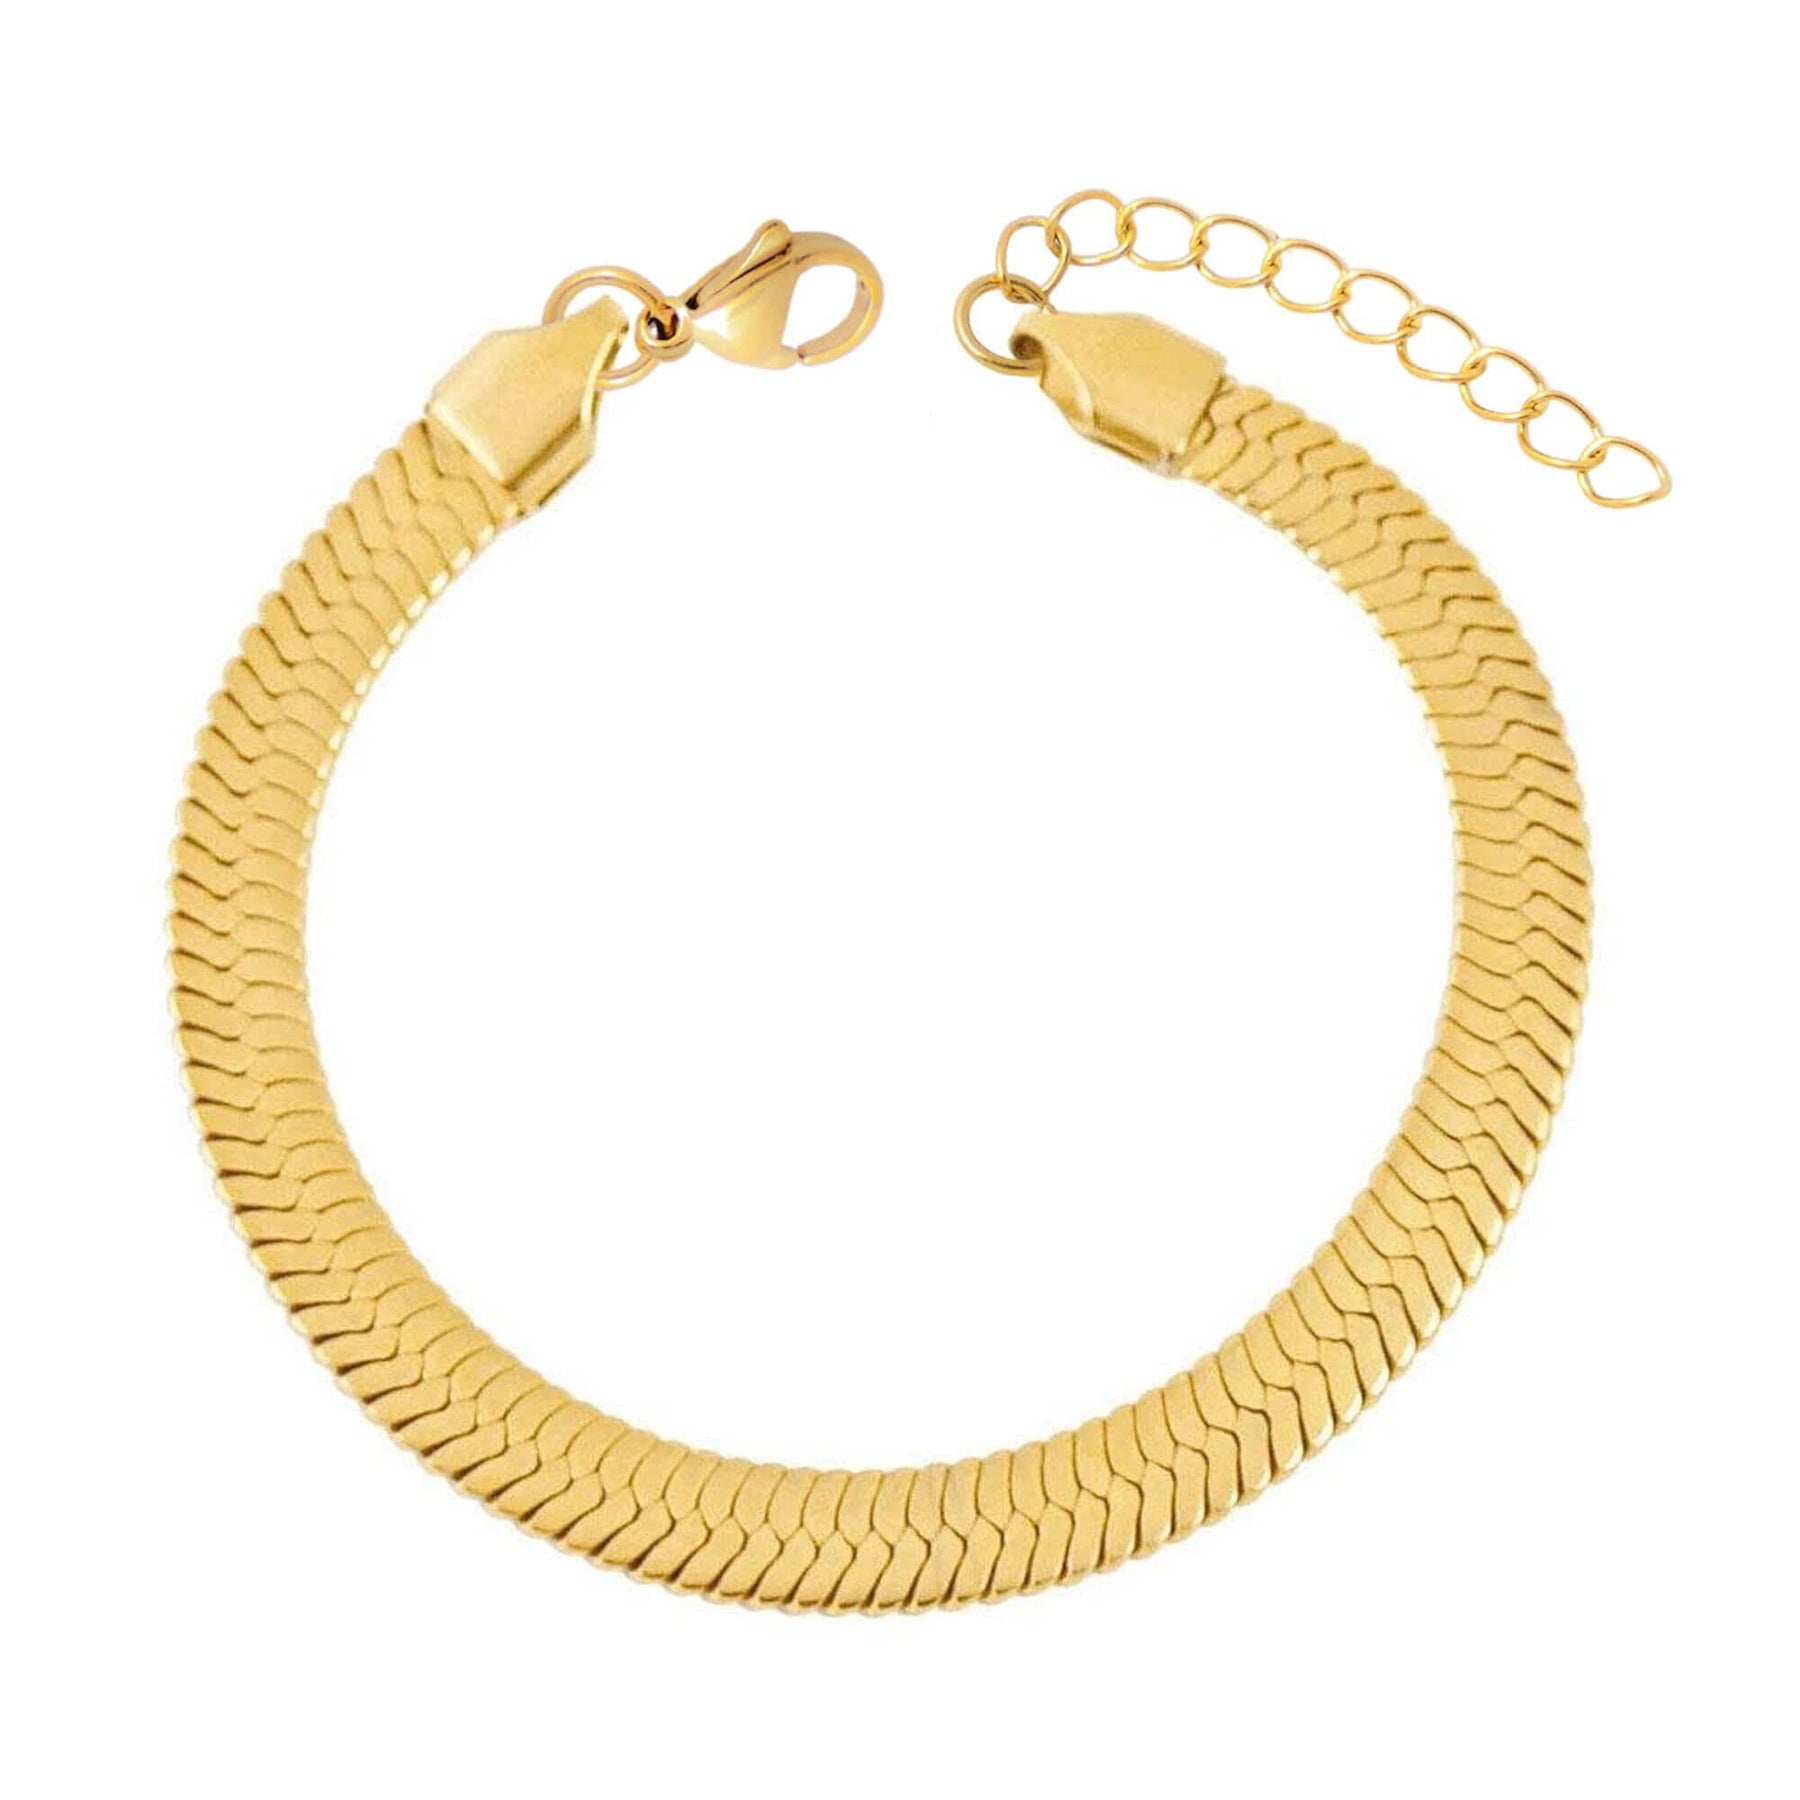 BohoMoon Stainless Steel Sophie Anklet Gold